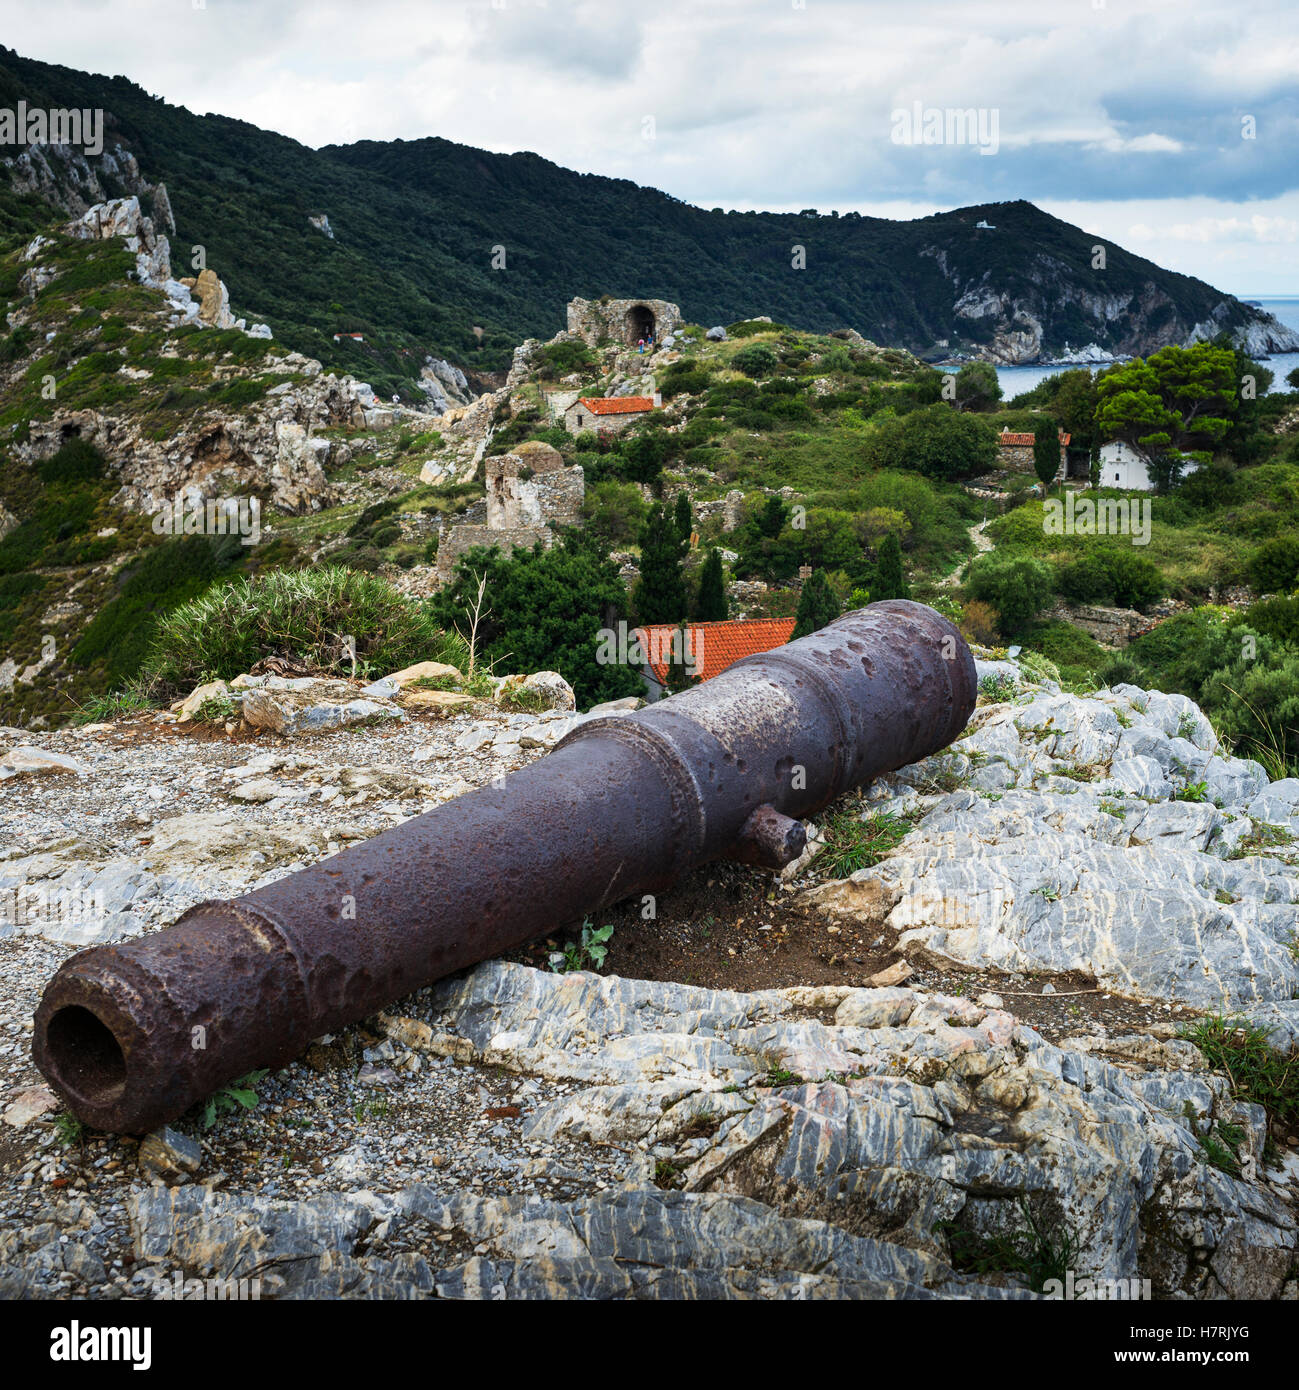 An old, rusted relic laying on the rock on a greek island with a rugged landscape and remote houses in the background; Skiathos, Greece Stock Photo